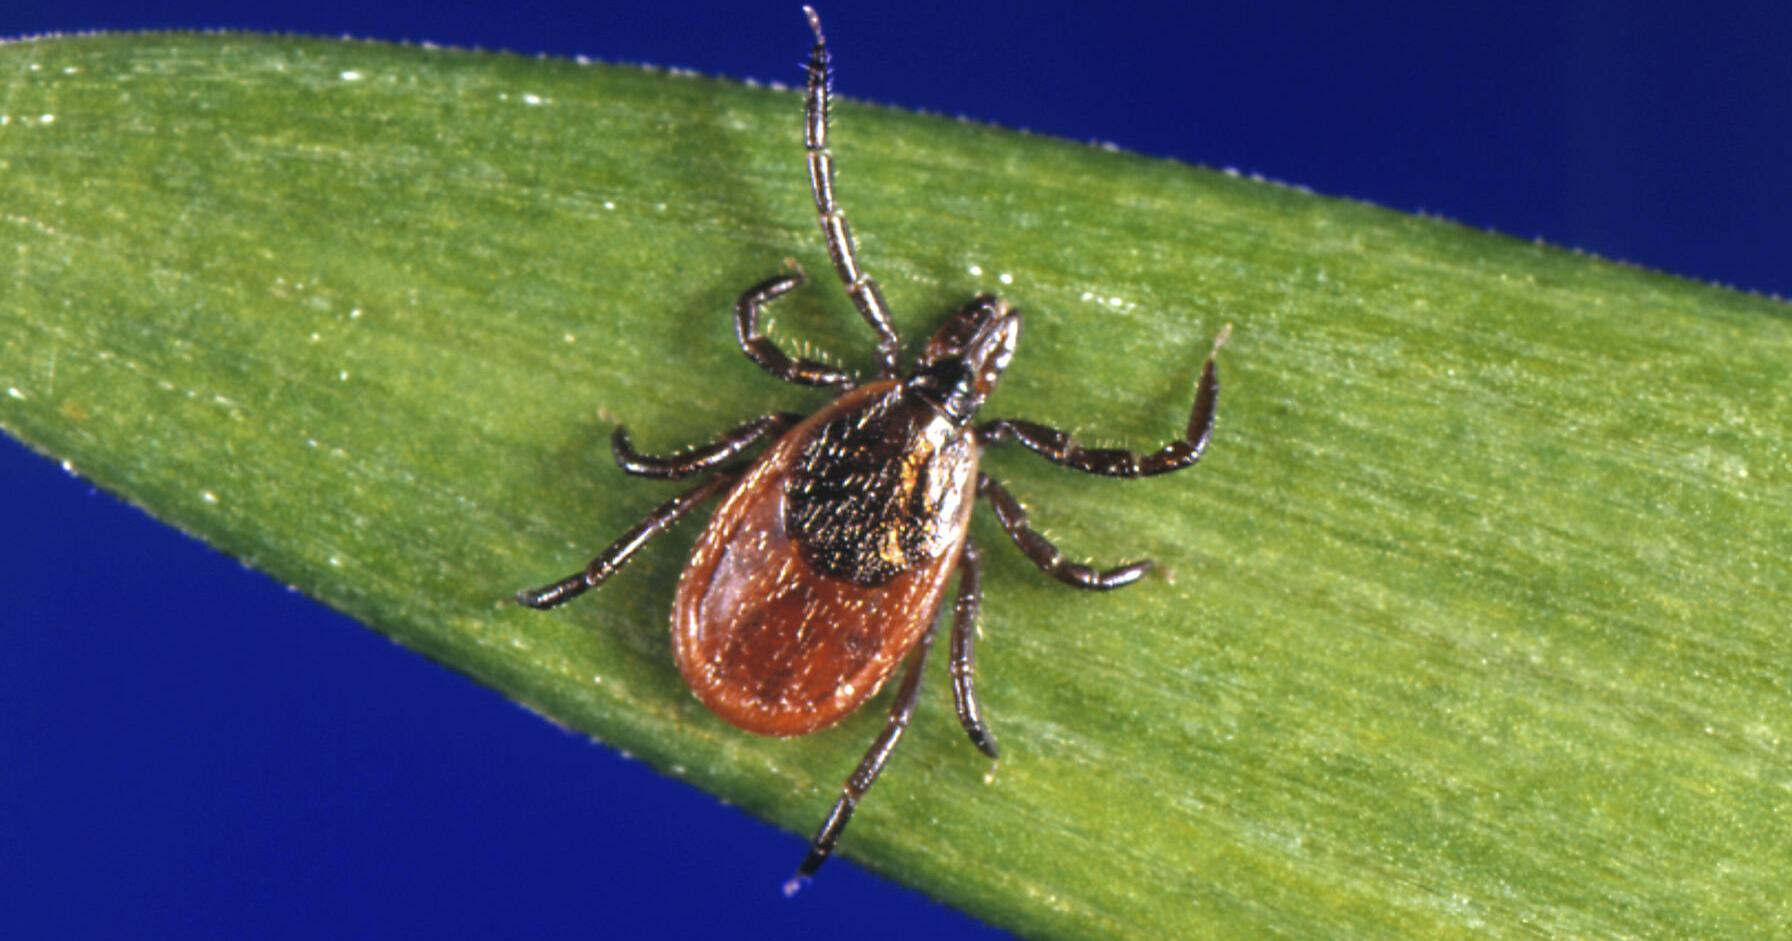 Wisconsin, Minnesota among top states for Lyme disease